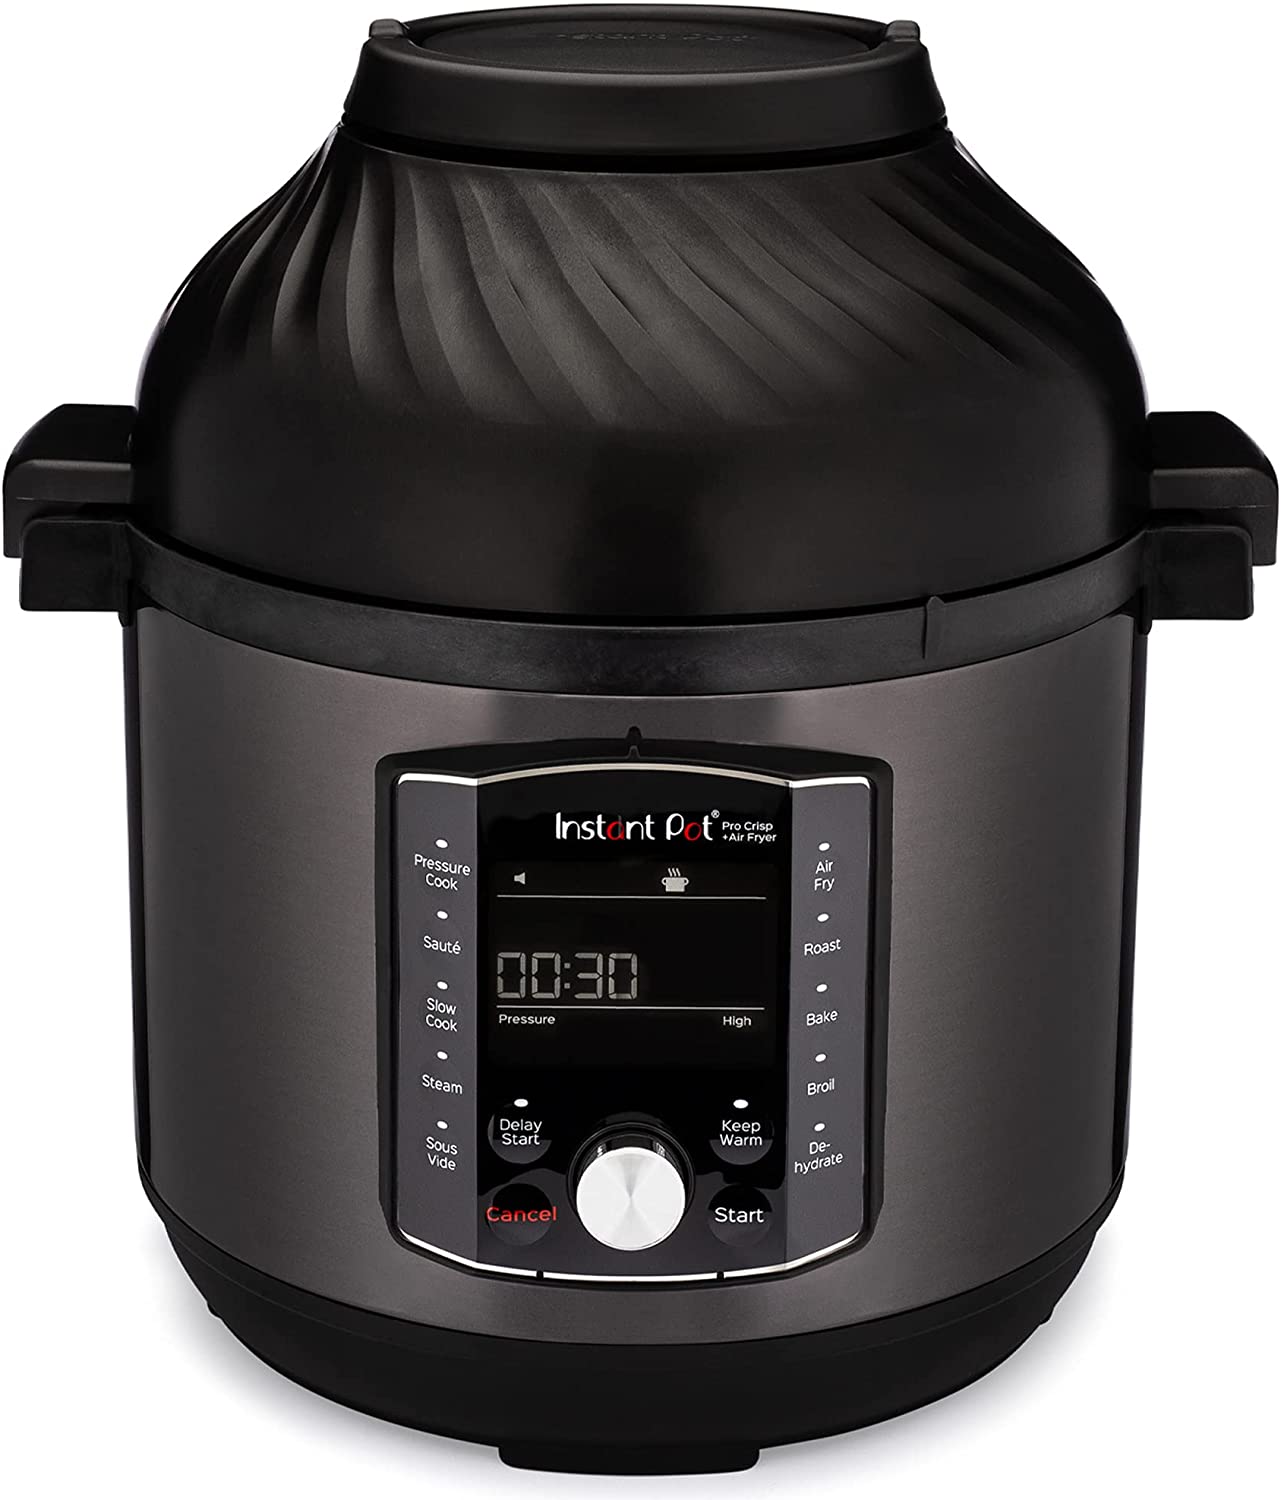 PowerXL Grill Air Fryer Combo Plus 6 QT 12-in-1 Indoor Slow Cooker, Roast,  Bake, 1550-Watts, Stainless Steel Finish